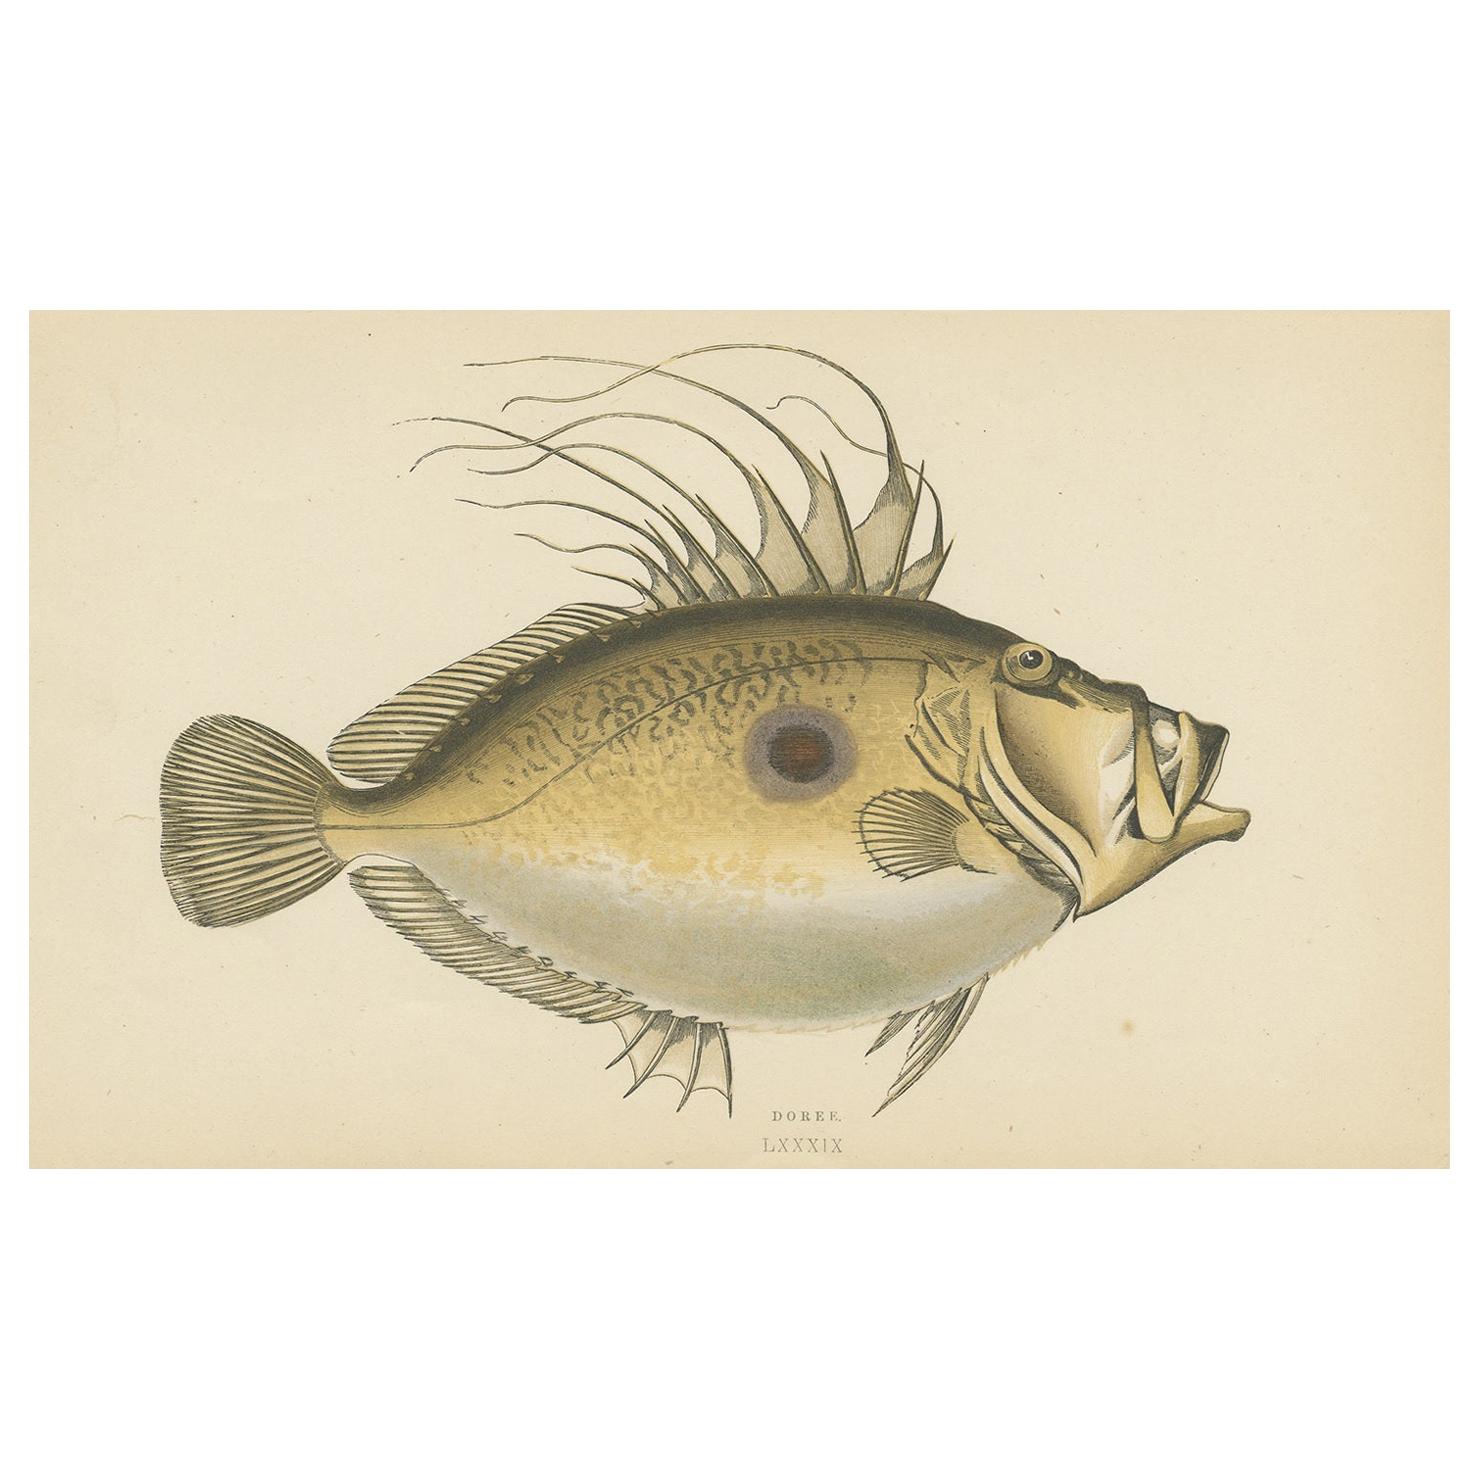 Antique Print of the Dory Fish by J. Couch, circa 1870